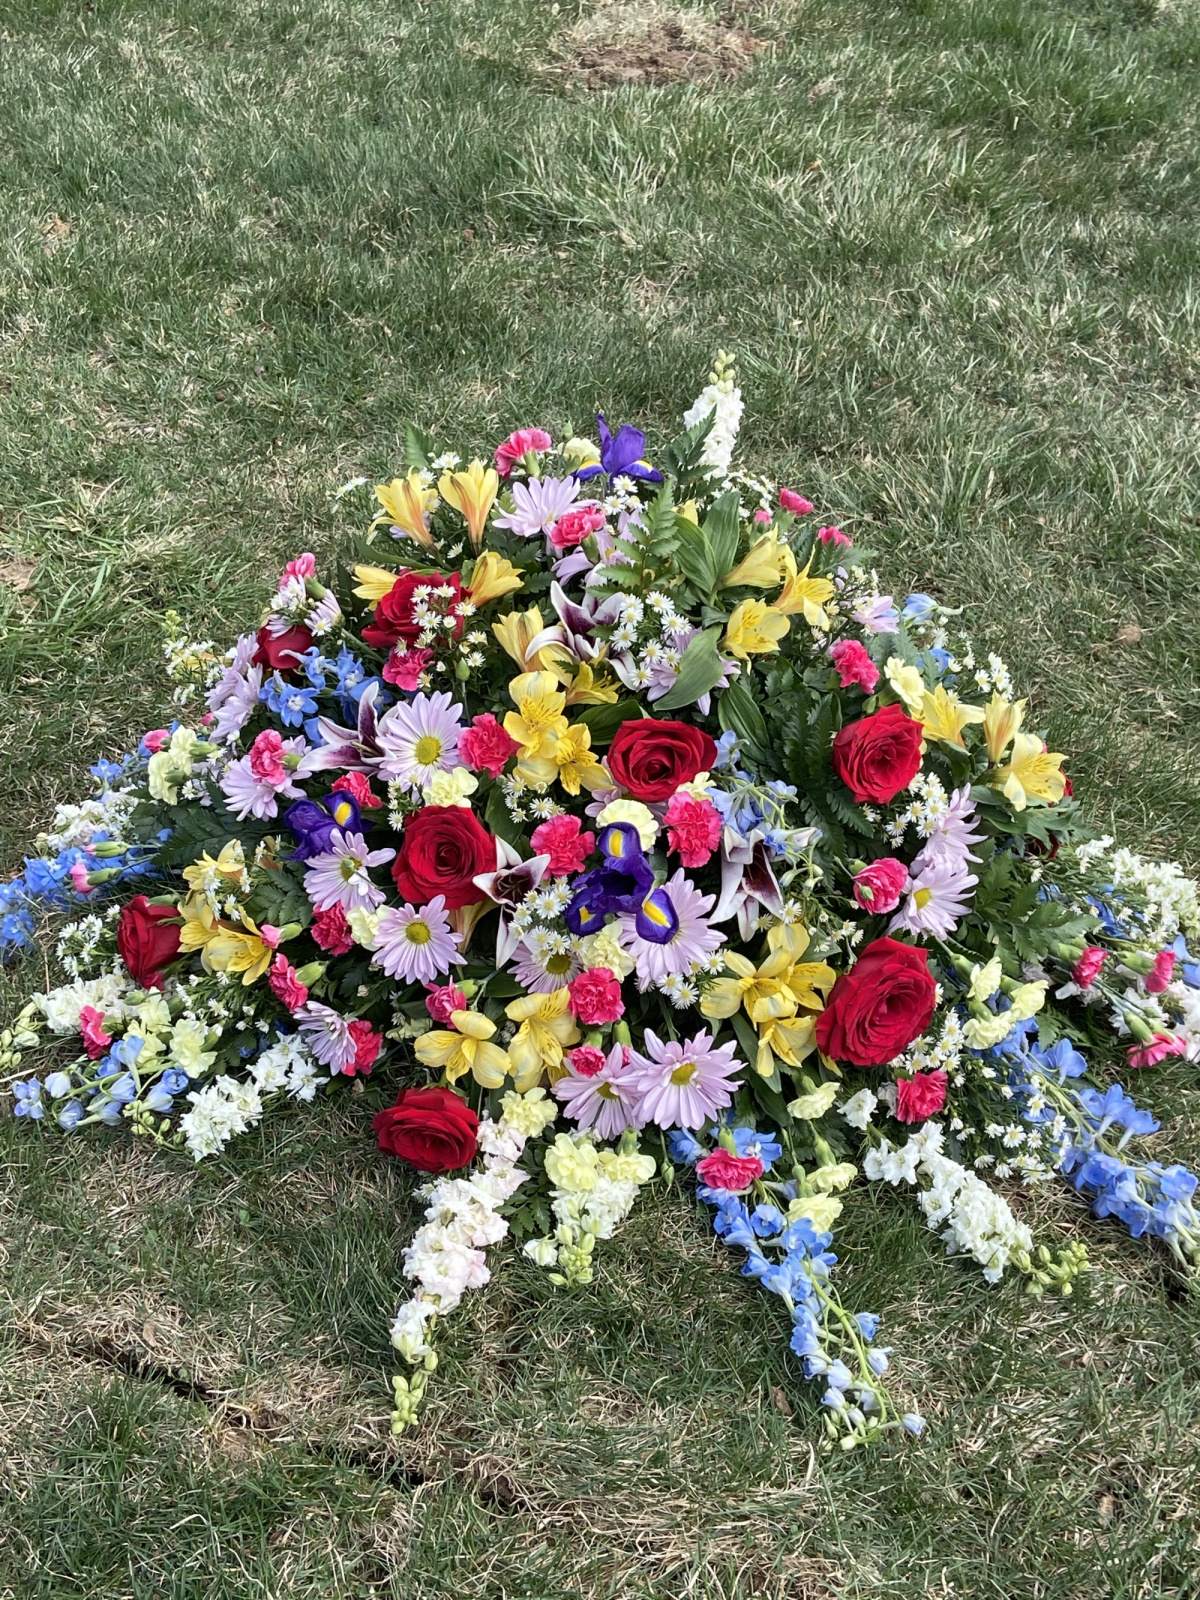 Close up of the flowers placed on her grave.